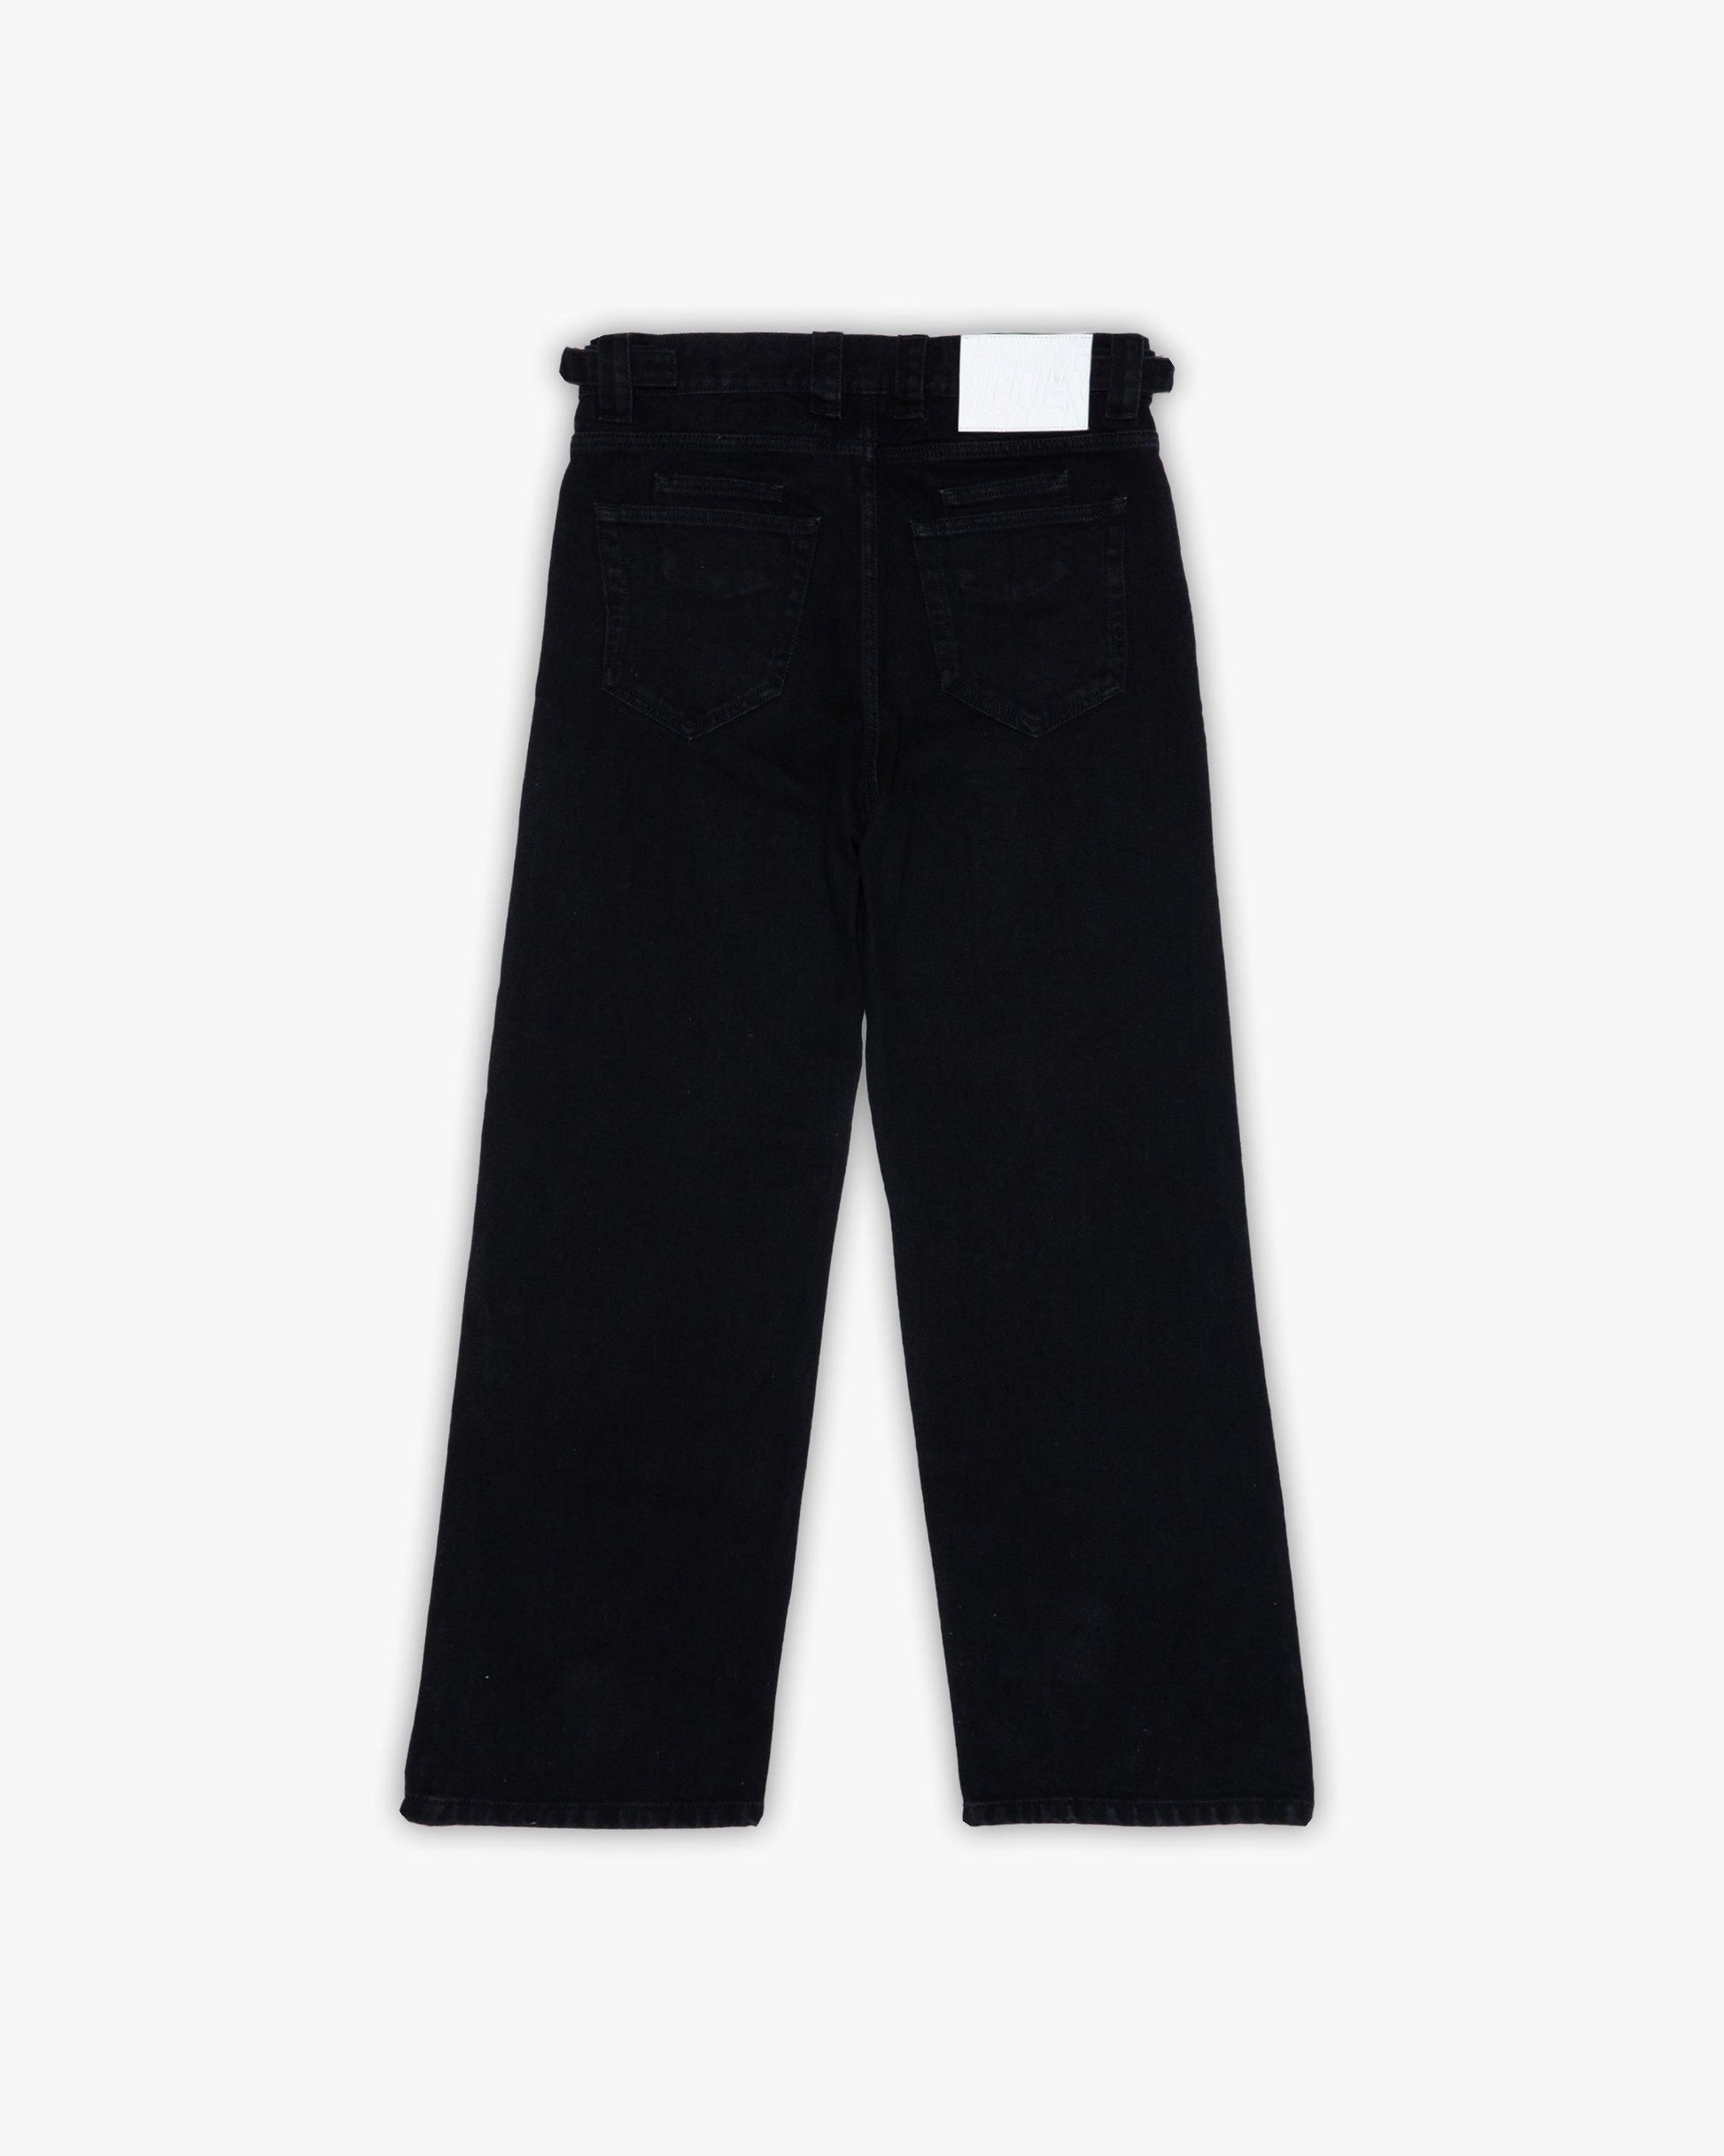 OUTLINED MIRAGE DENIM BLACK / WHITE - VICINITY